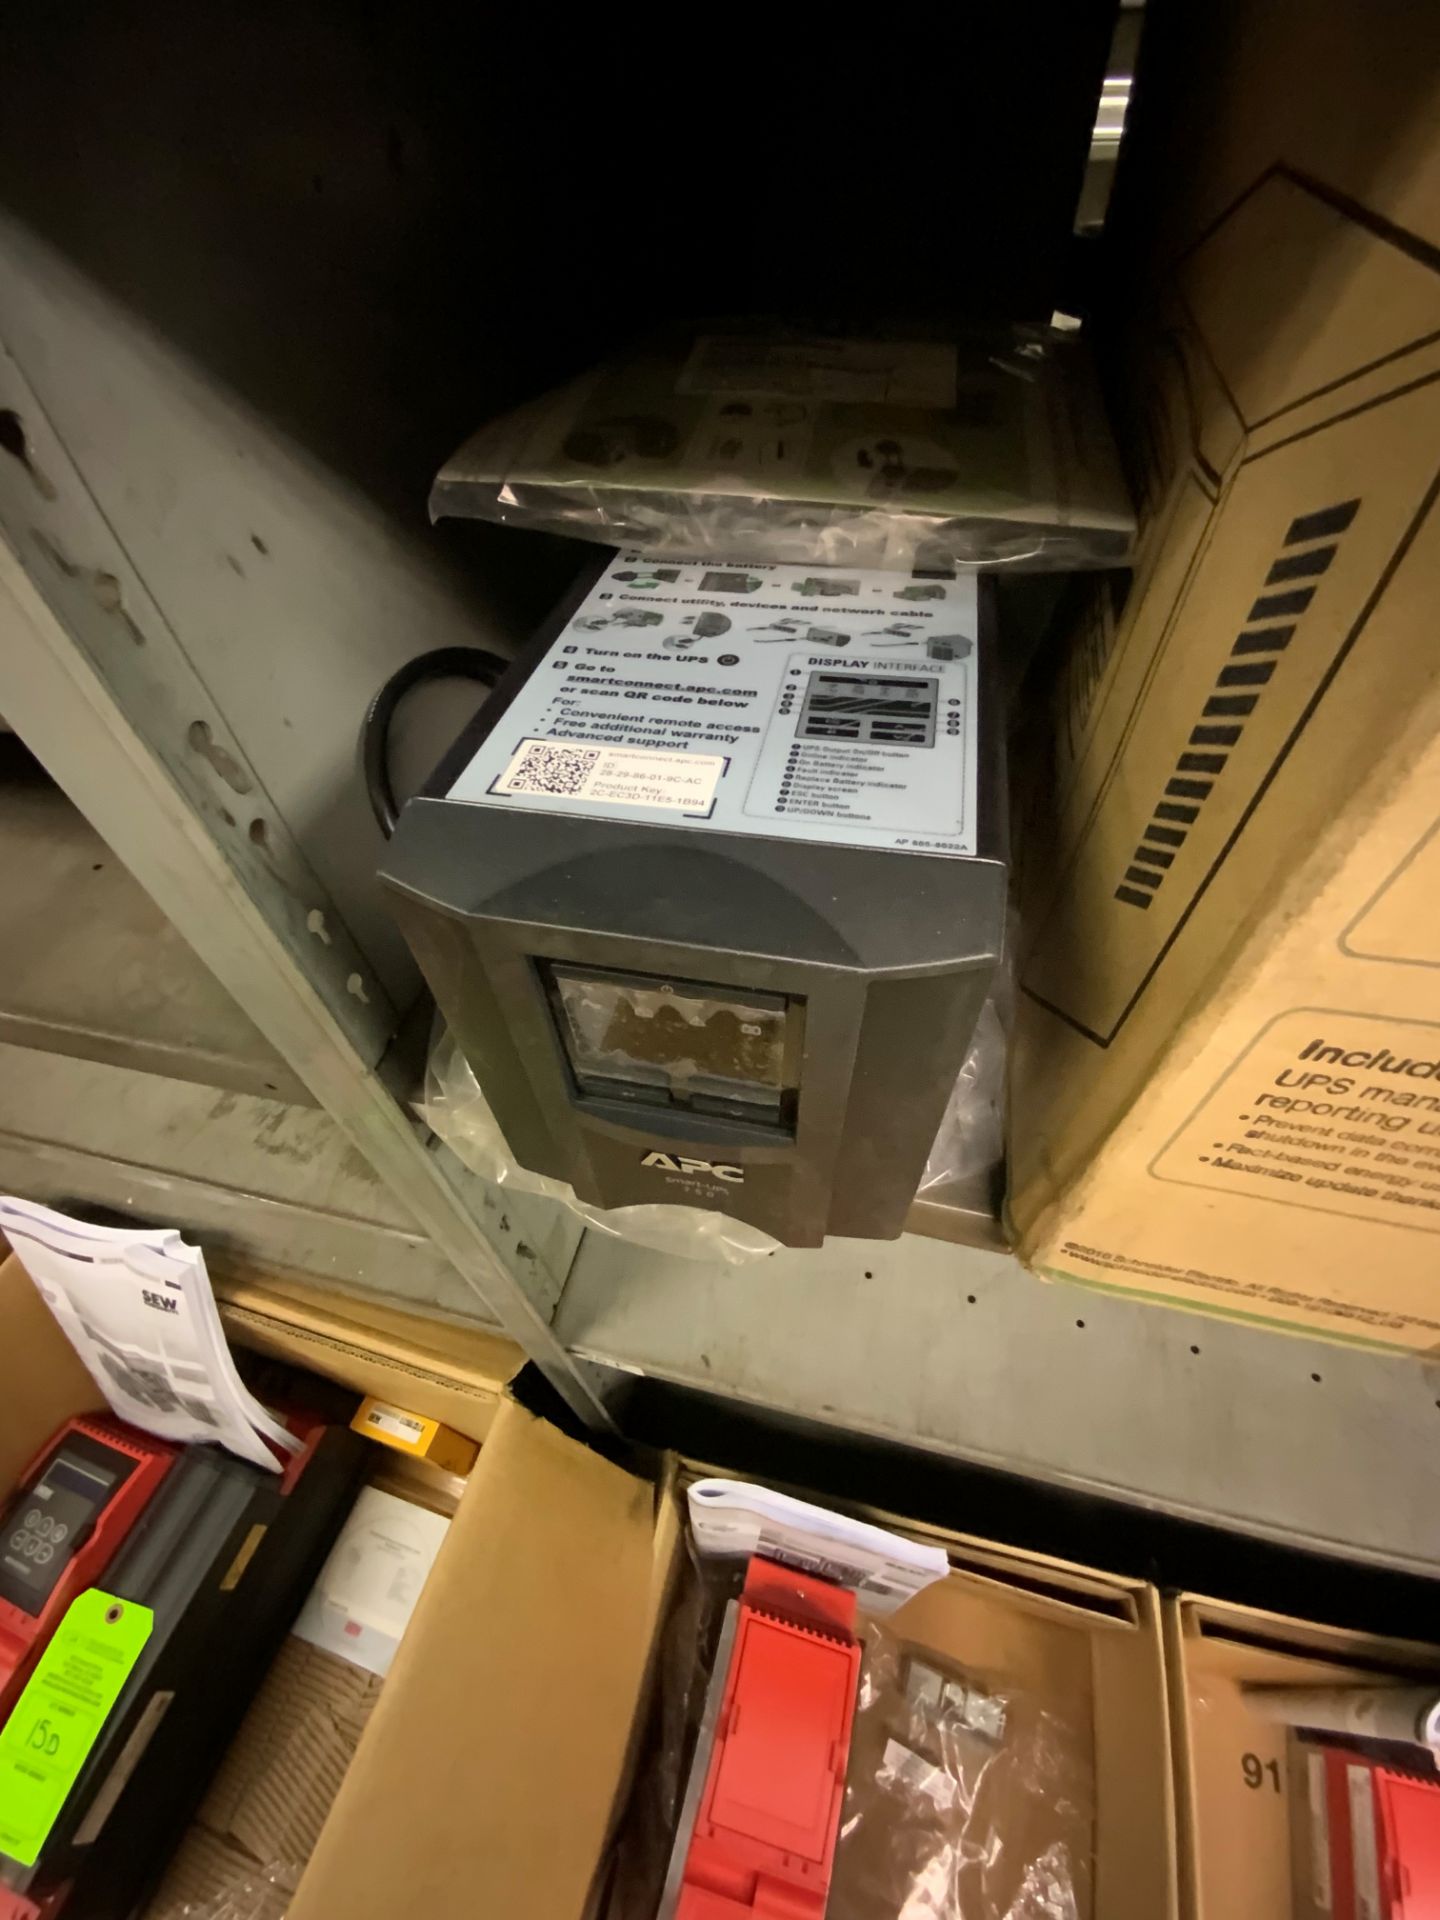 (2) SCHNEIDER ELECTRIC 10 HP AC SPEED DRIVE(S) & APC SMART UPS 750 - SEE PICTURES - Image 3 of 3